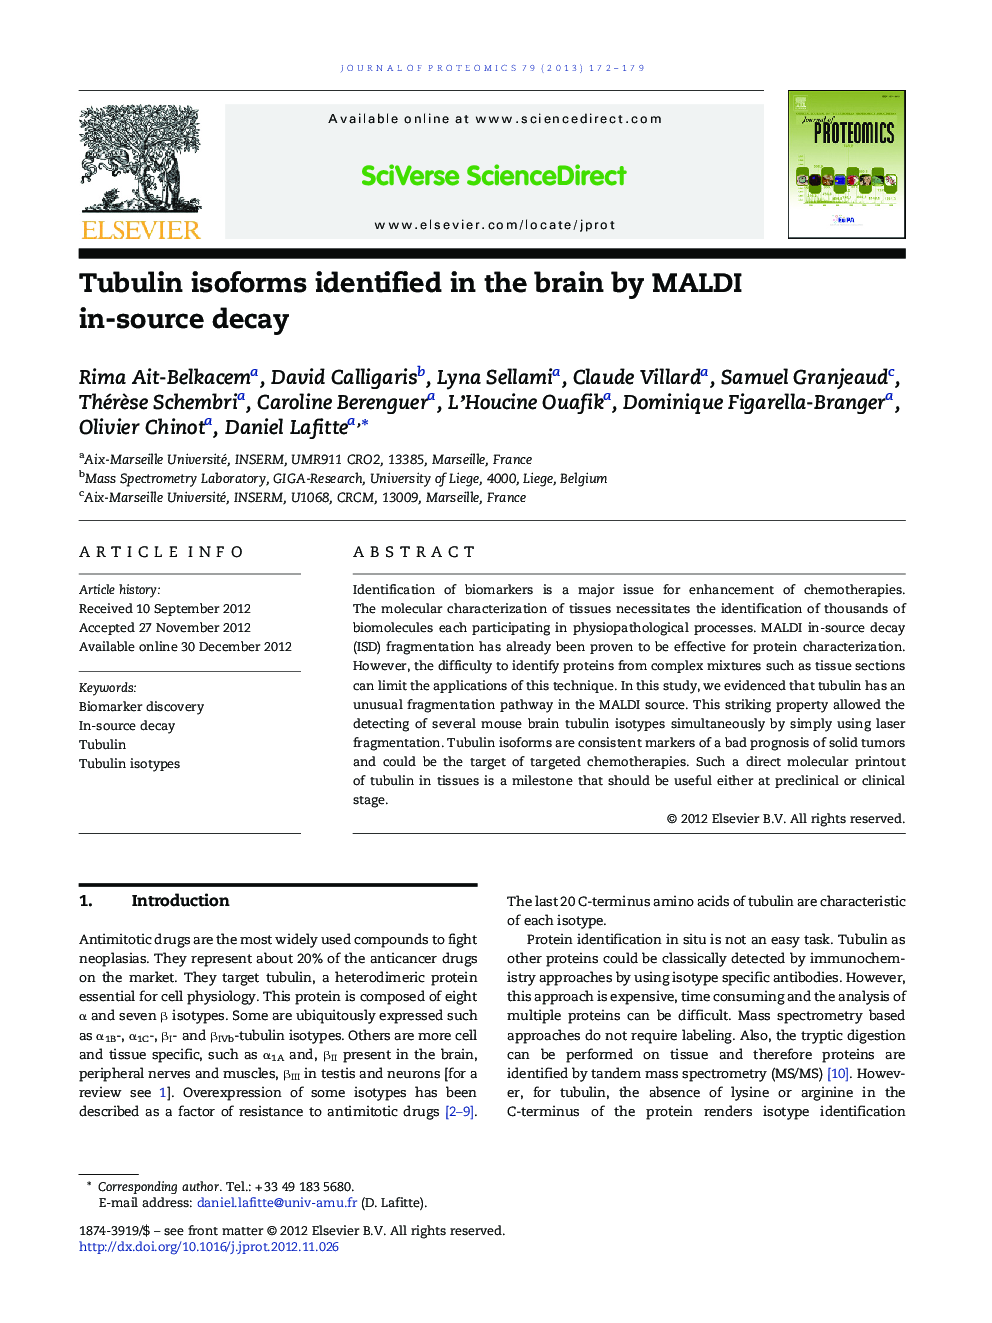 Tubulin isoforms identified in the brain by MALDI in-source decay